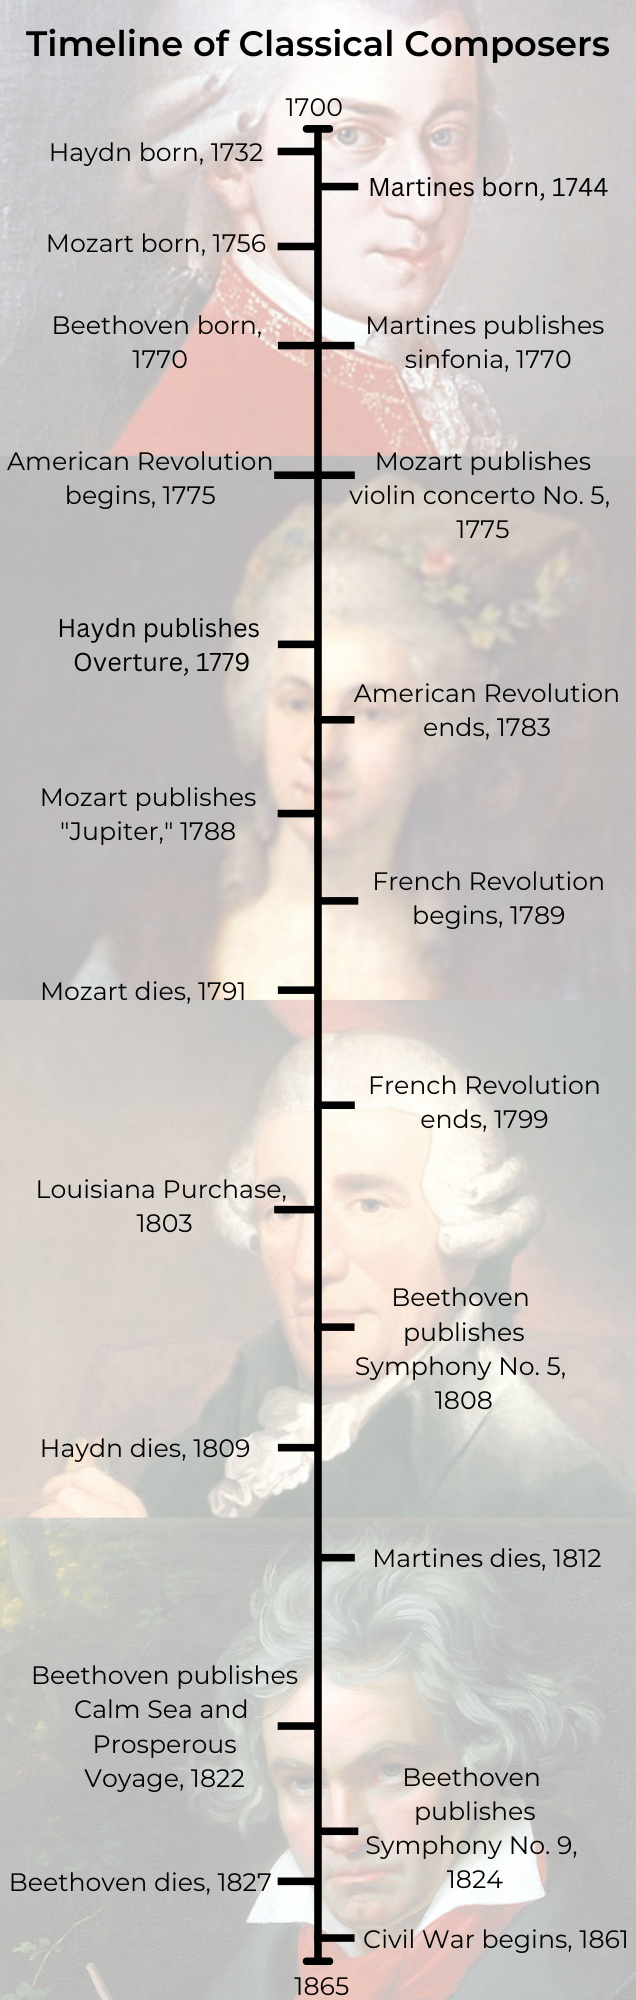 Timeline of Classical Composers